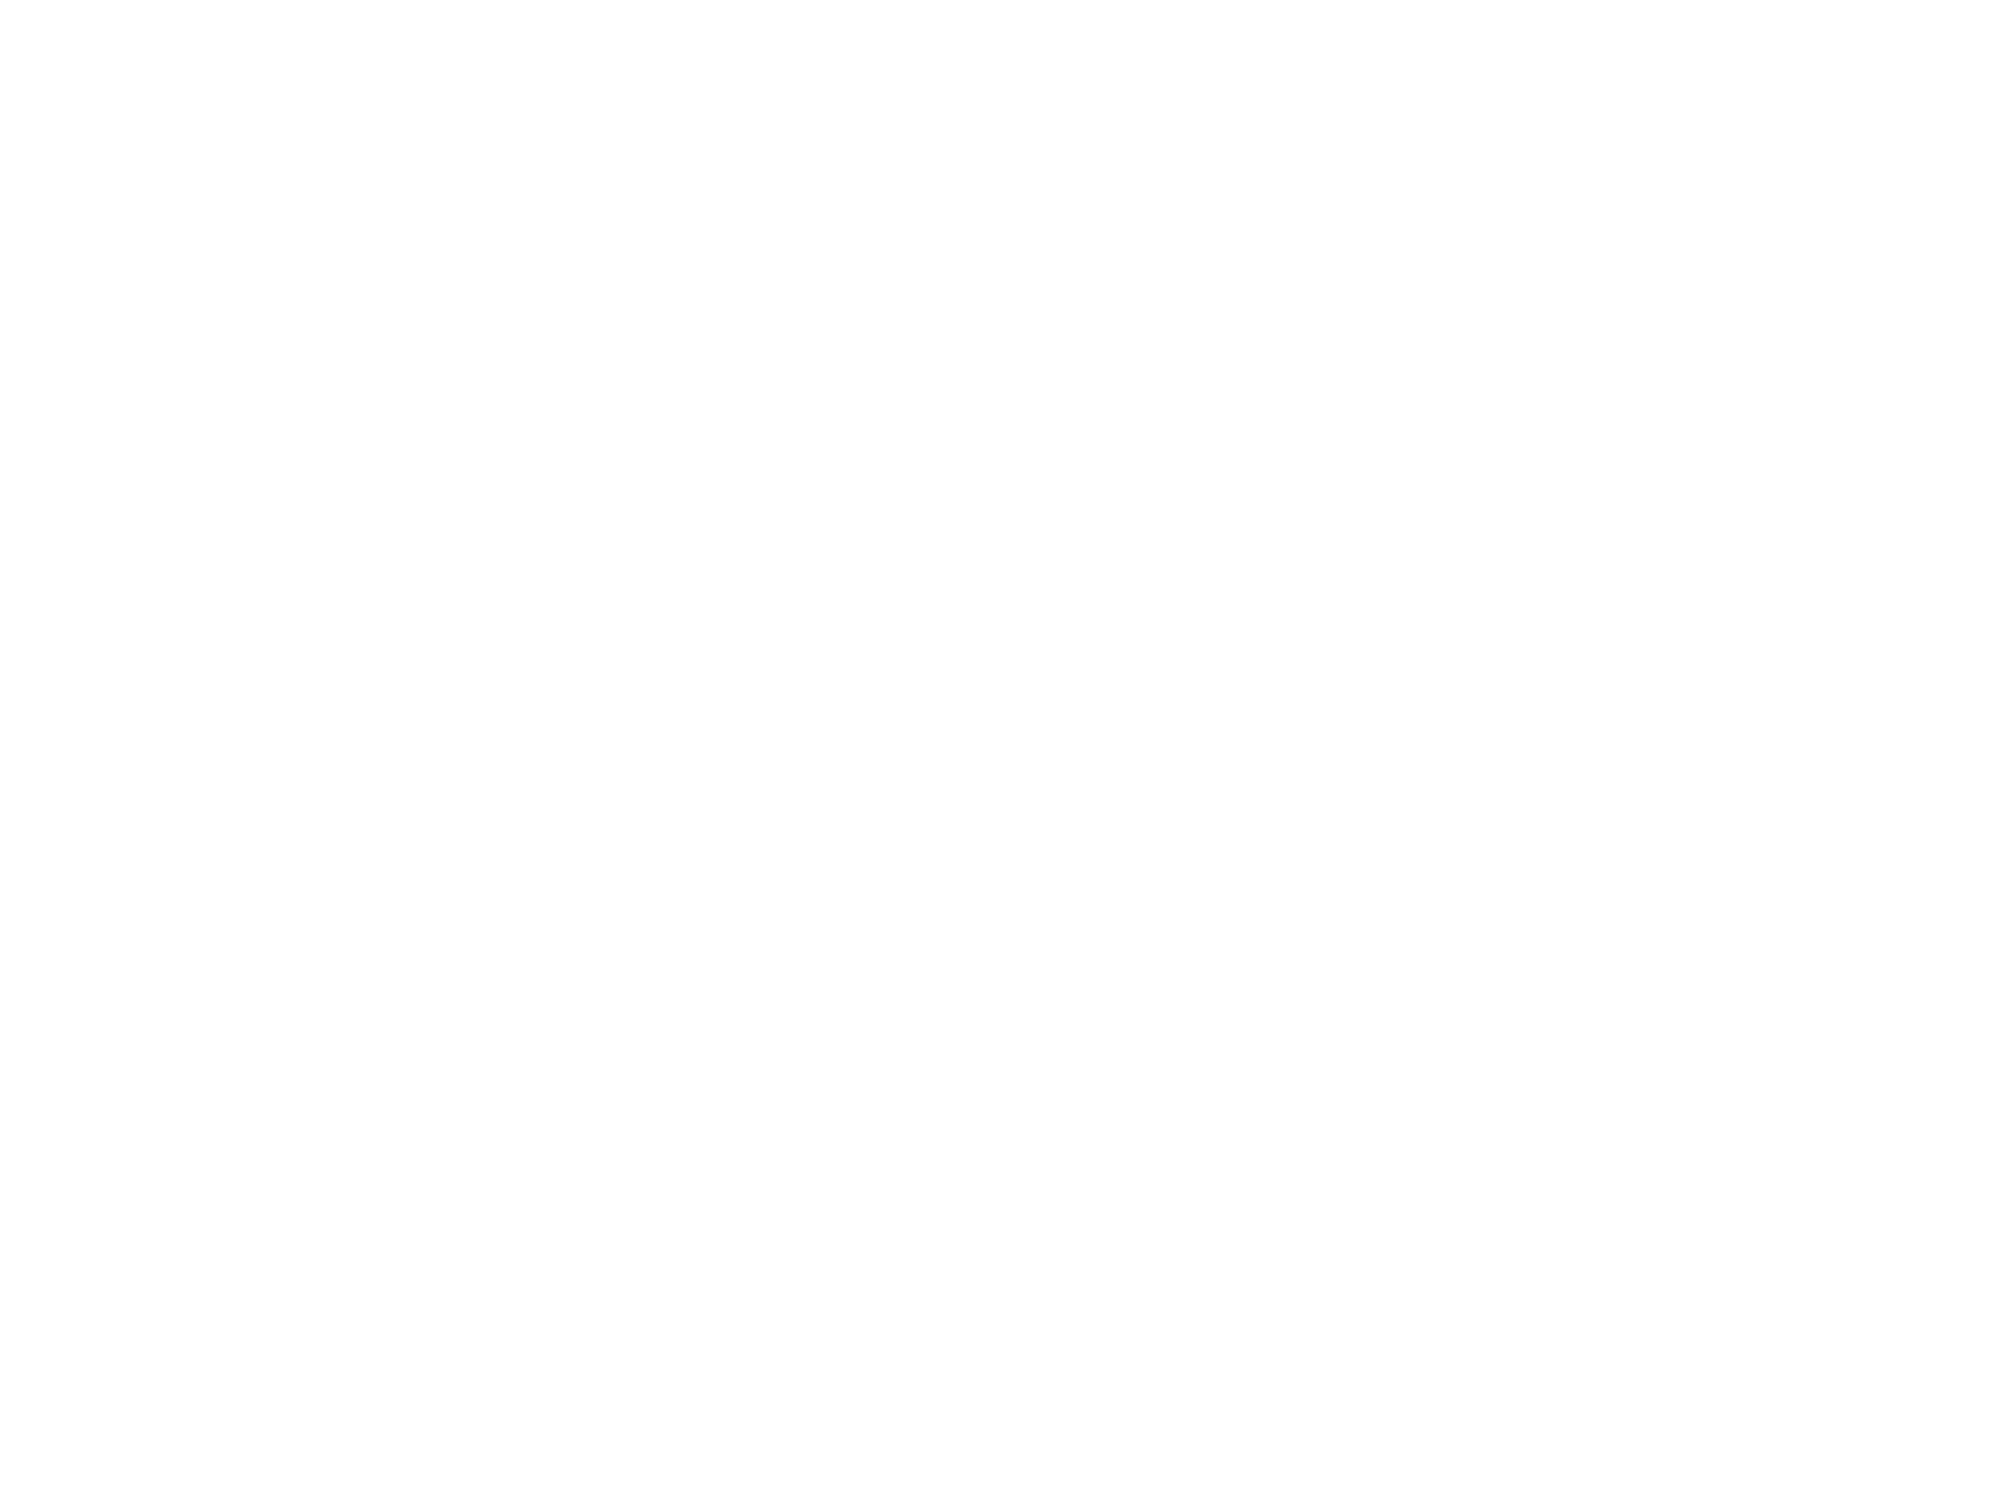 Route 40 Brewing & Distilling